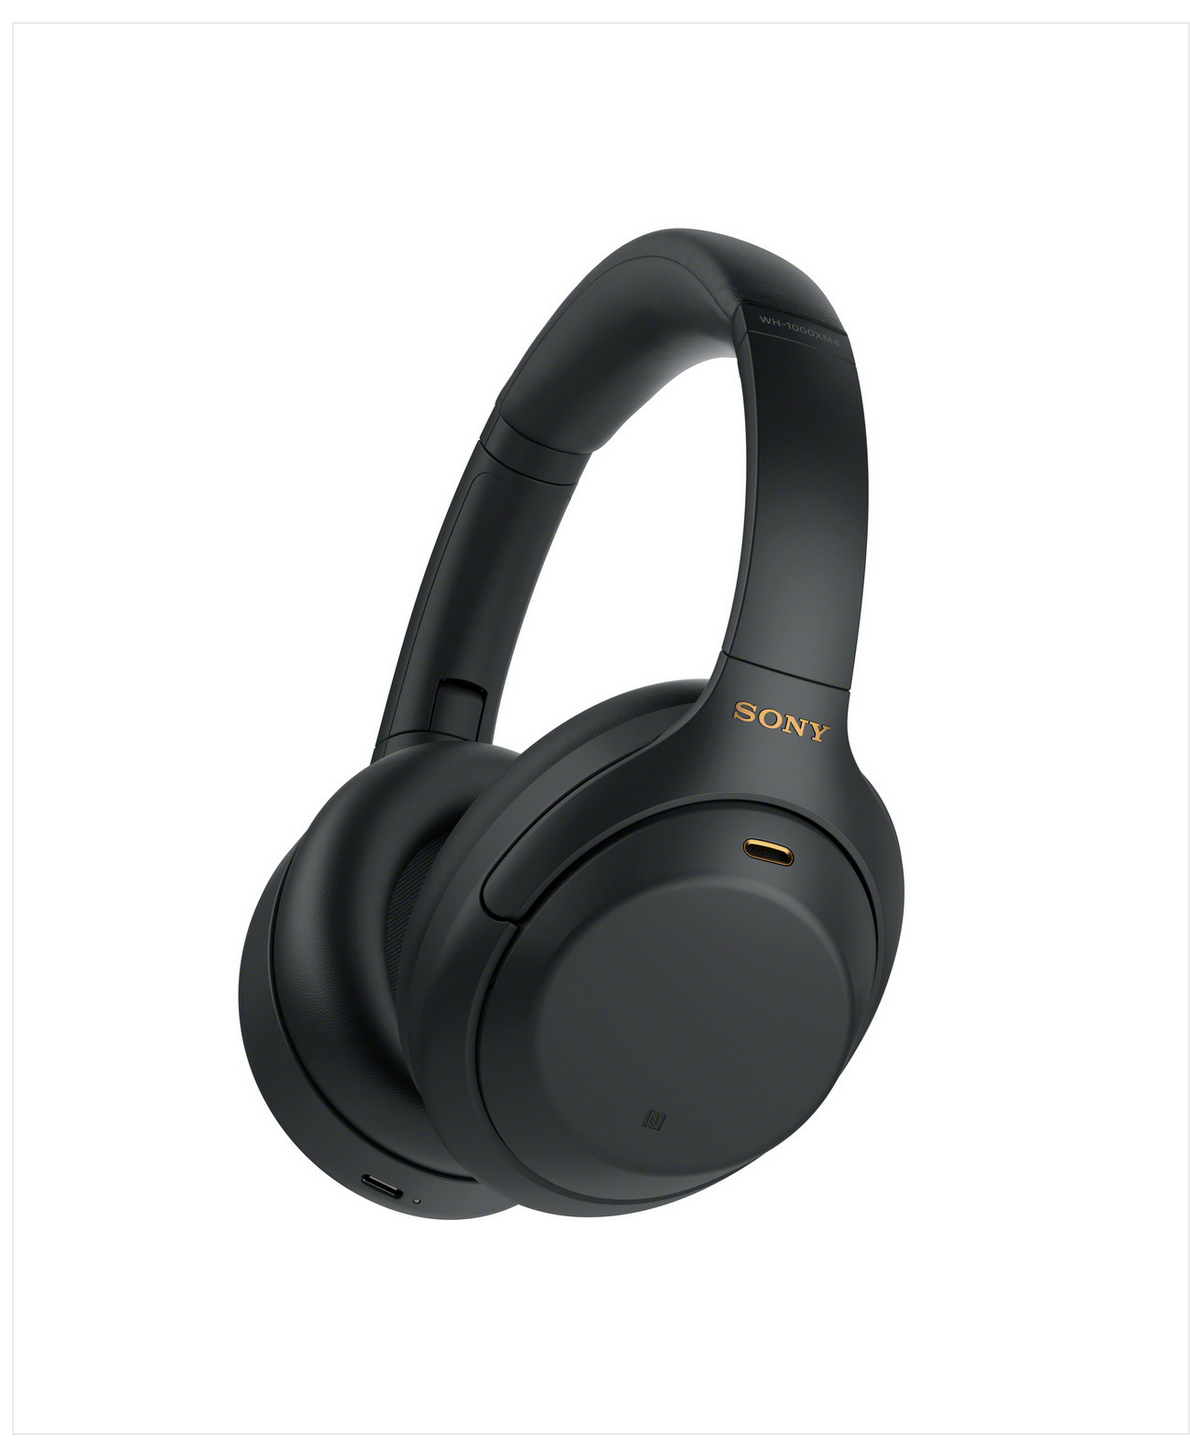 USED Sony WH1000XM4 Noise Cancelling Bluetooth Headphones (BLACK) $149